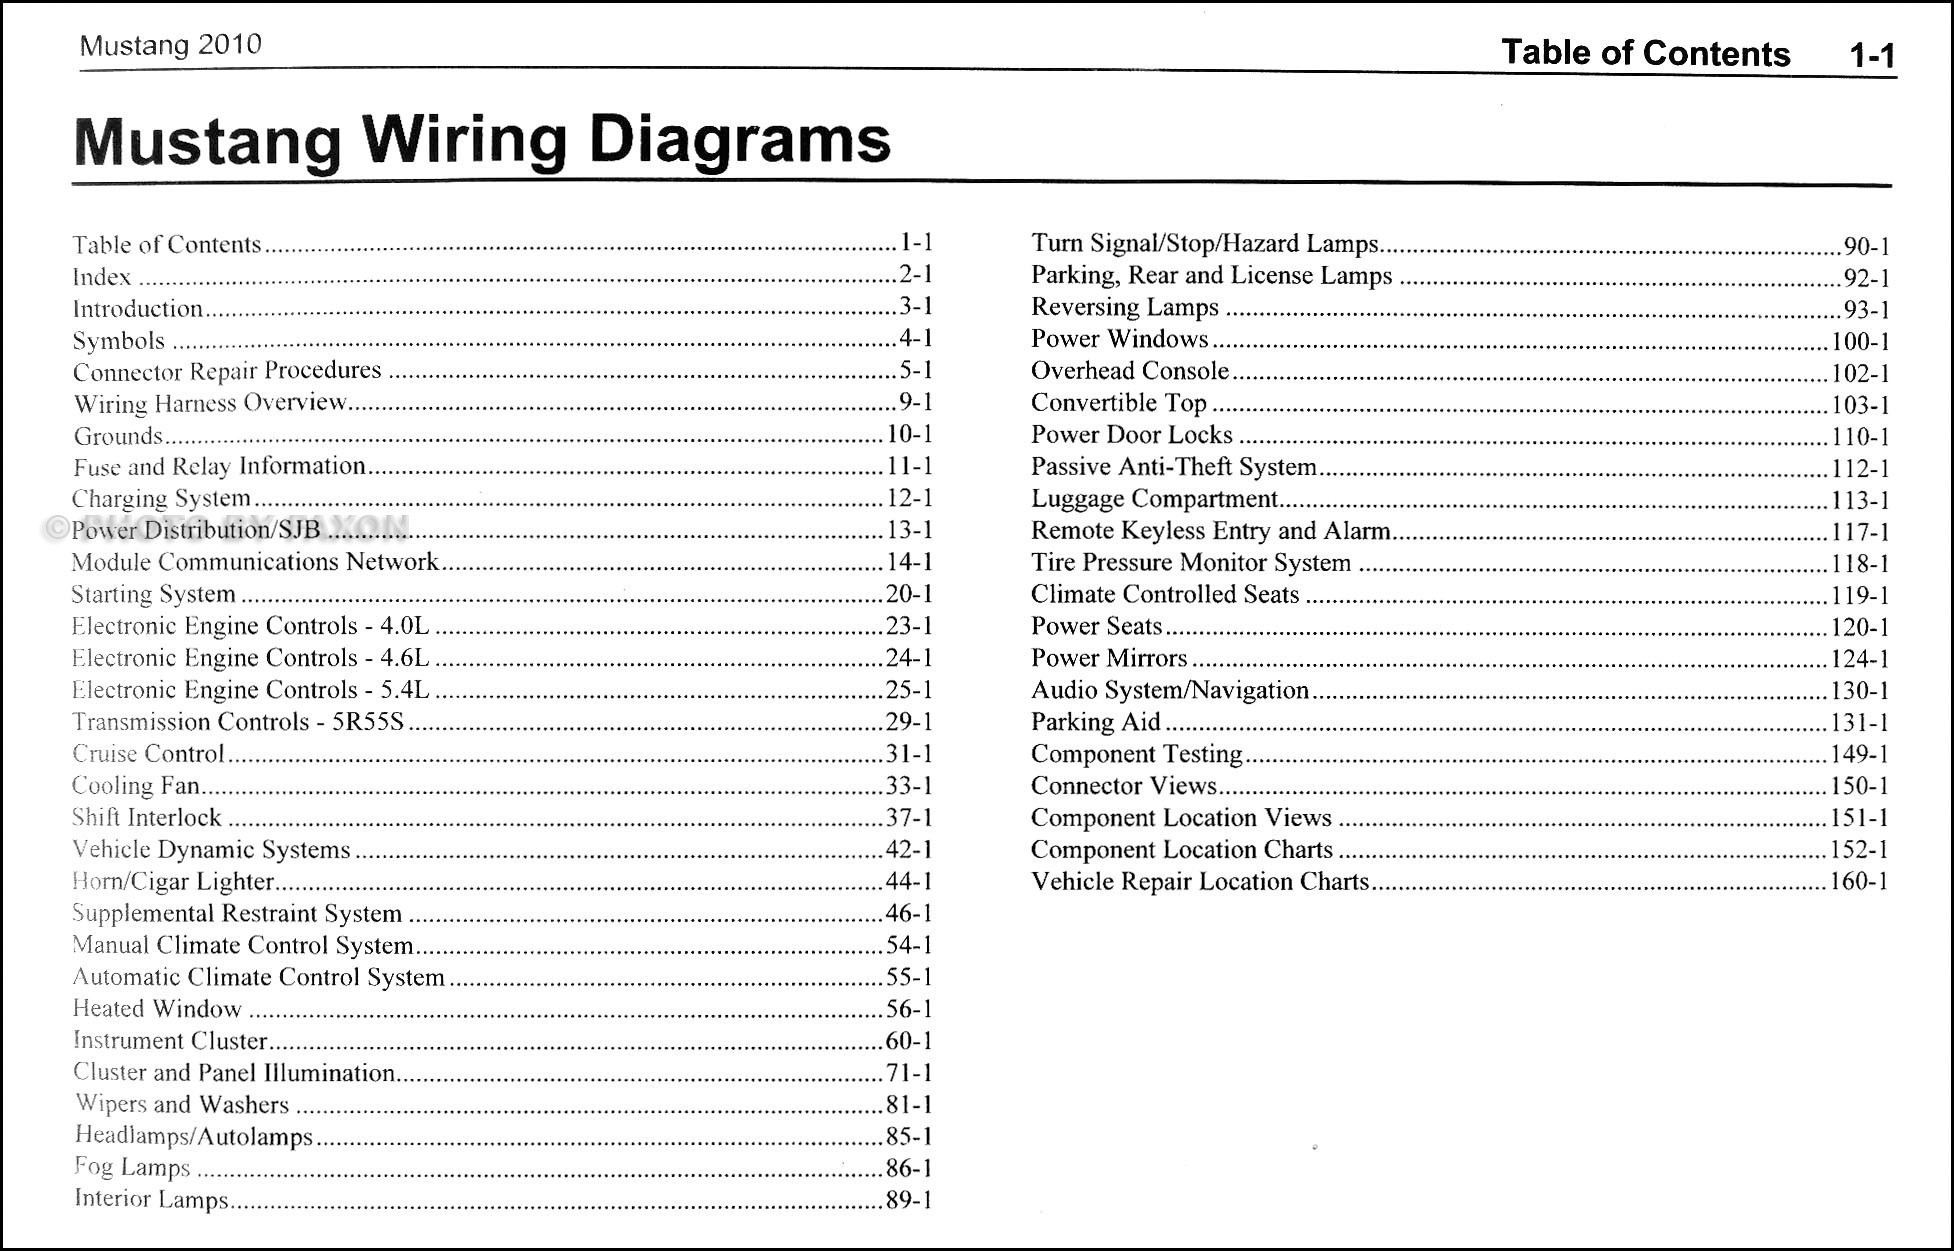 Car sound System Wiring Diagram Wiring Diagram Car Stereo Valid Amplifier Wiring Diagram Of Car sound System Wiring Diagram